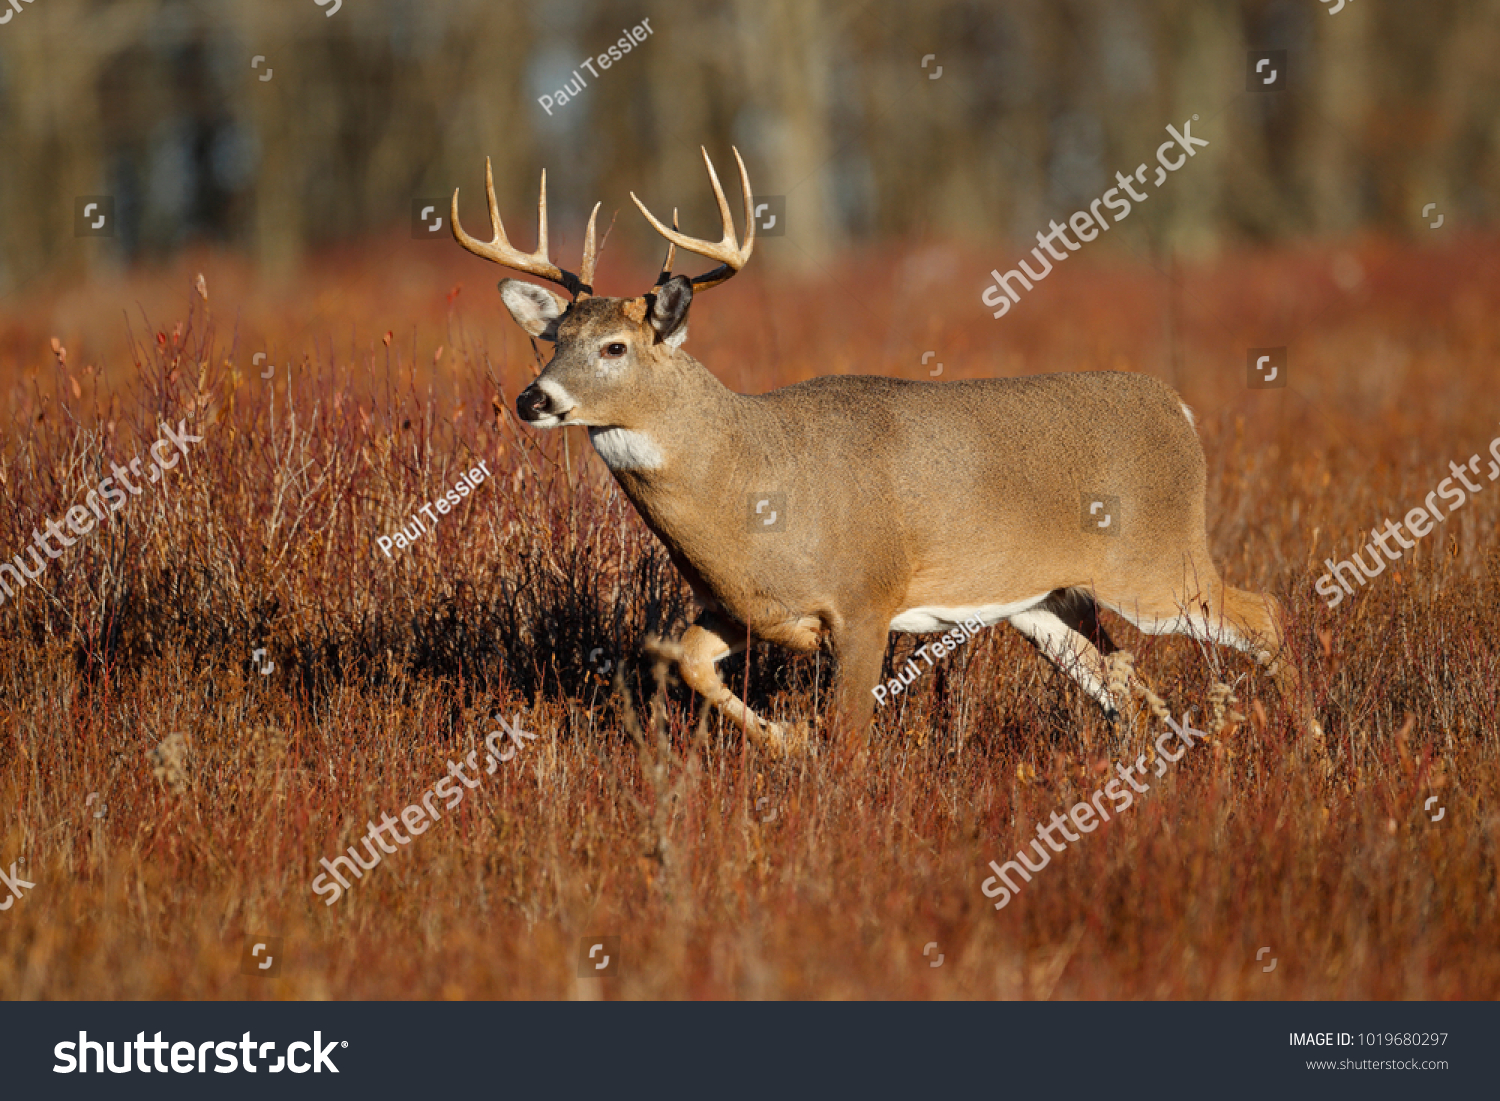 A white-tailed deer standing in a meadow #1019680297